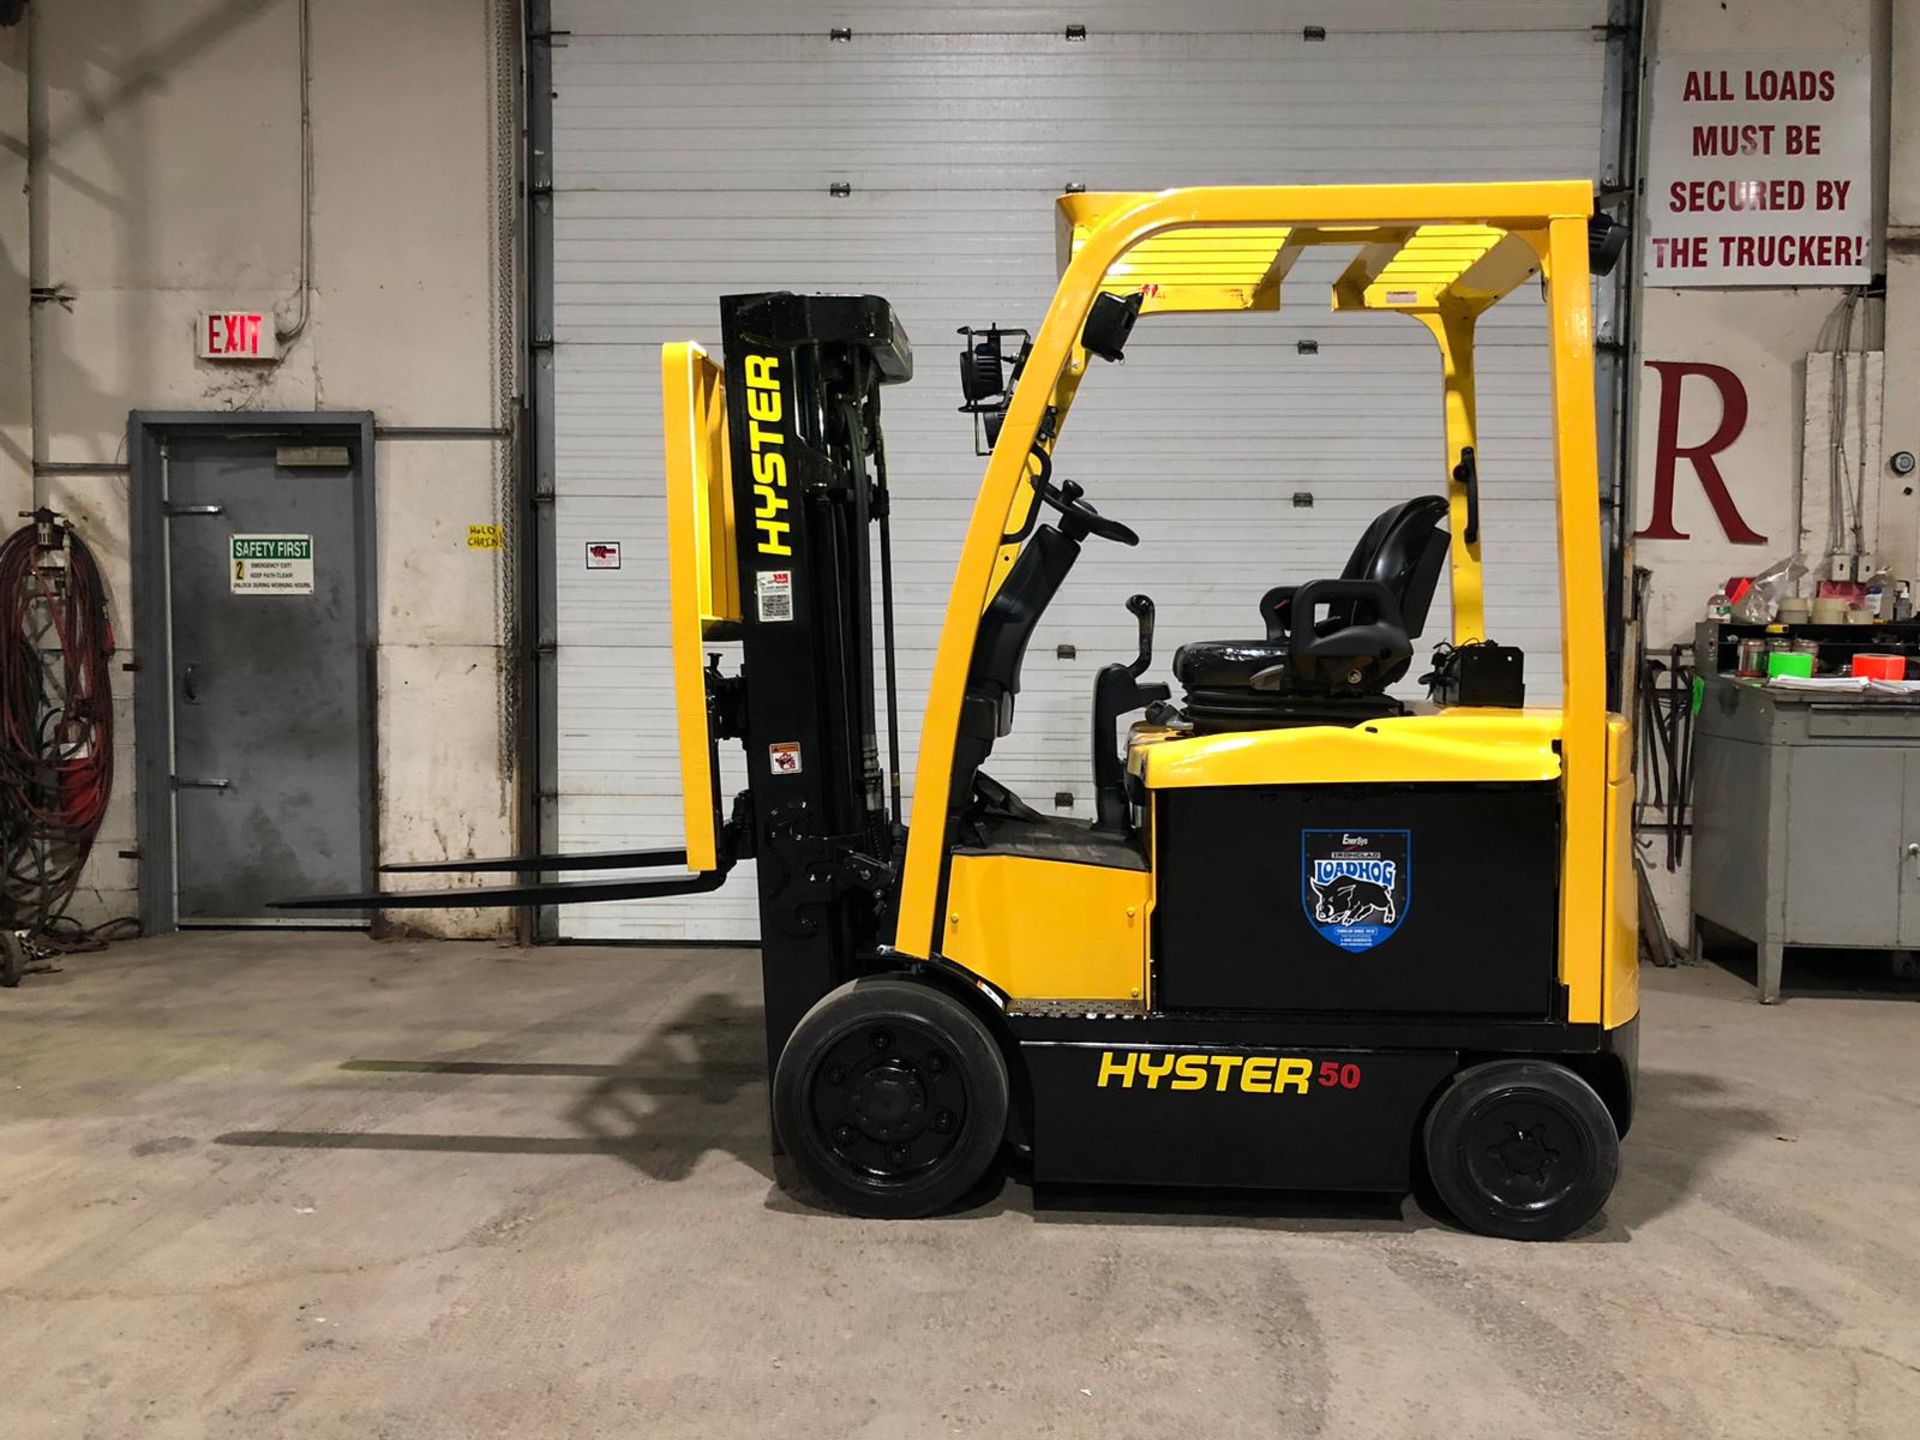 NICE 2016 Hyster model 50 - 5,000lbs Capacity Forklift Electric with Sideshift - 3-stage mast - Image 3 of 4